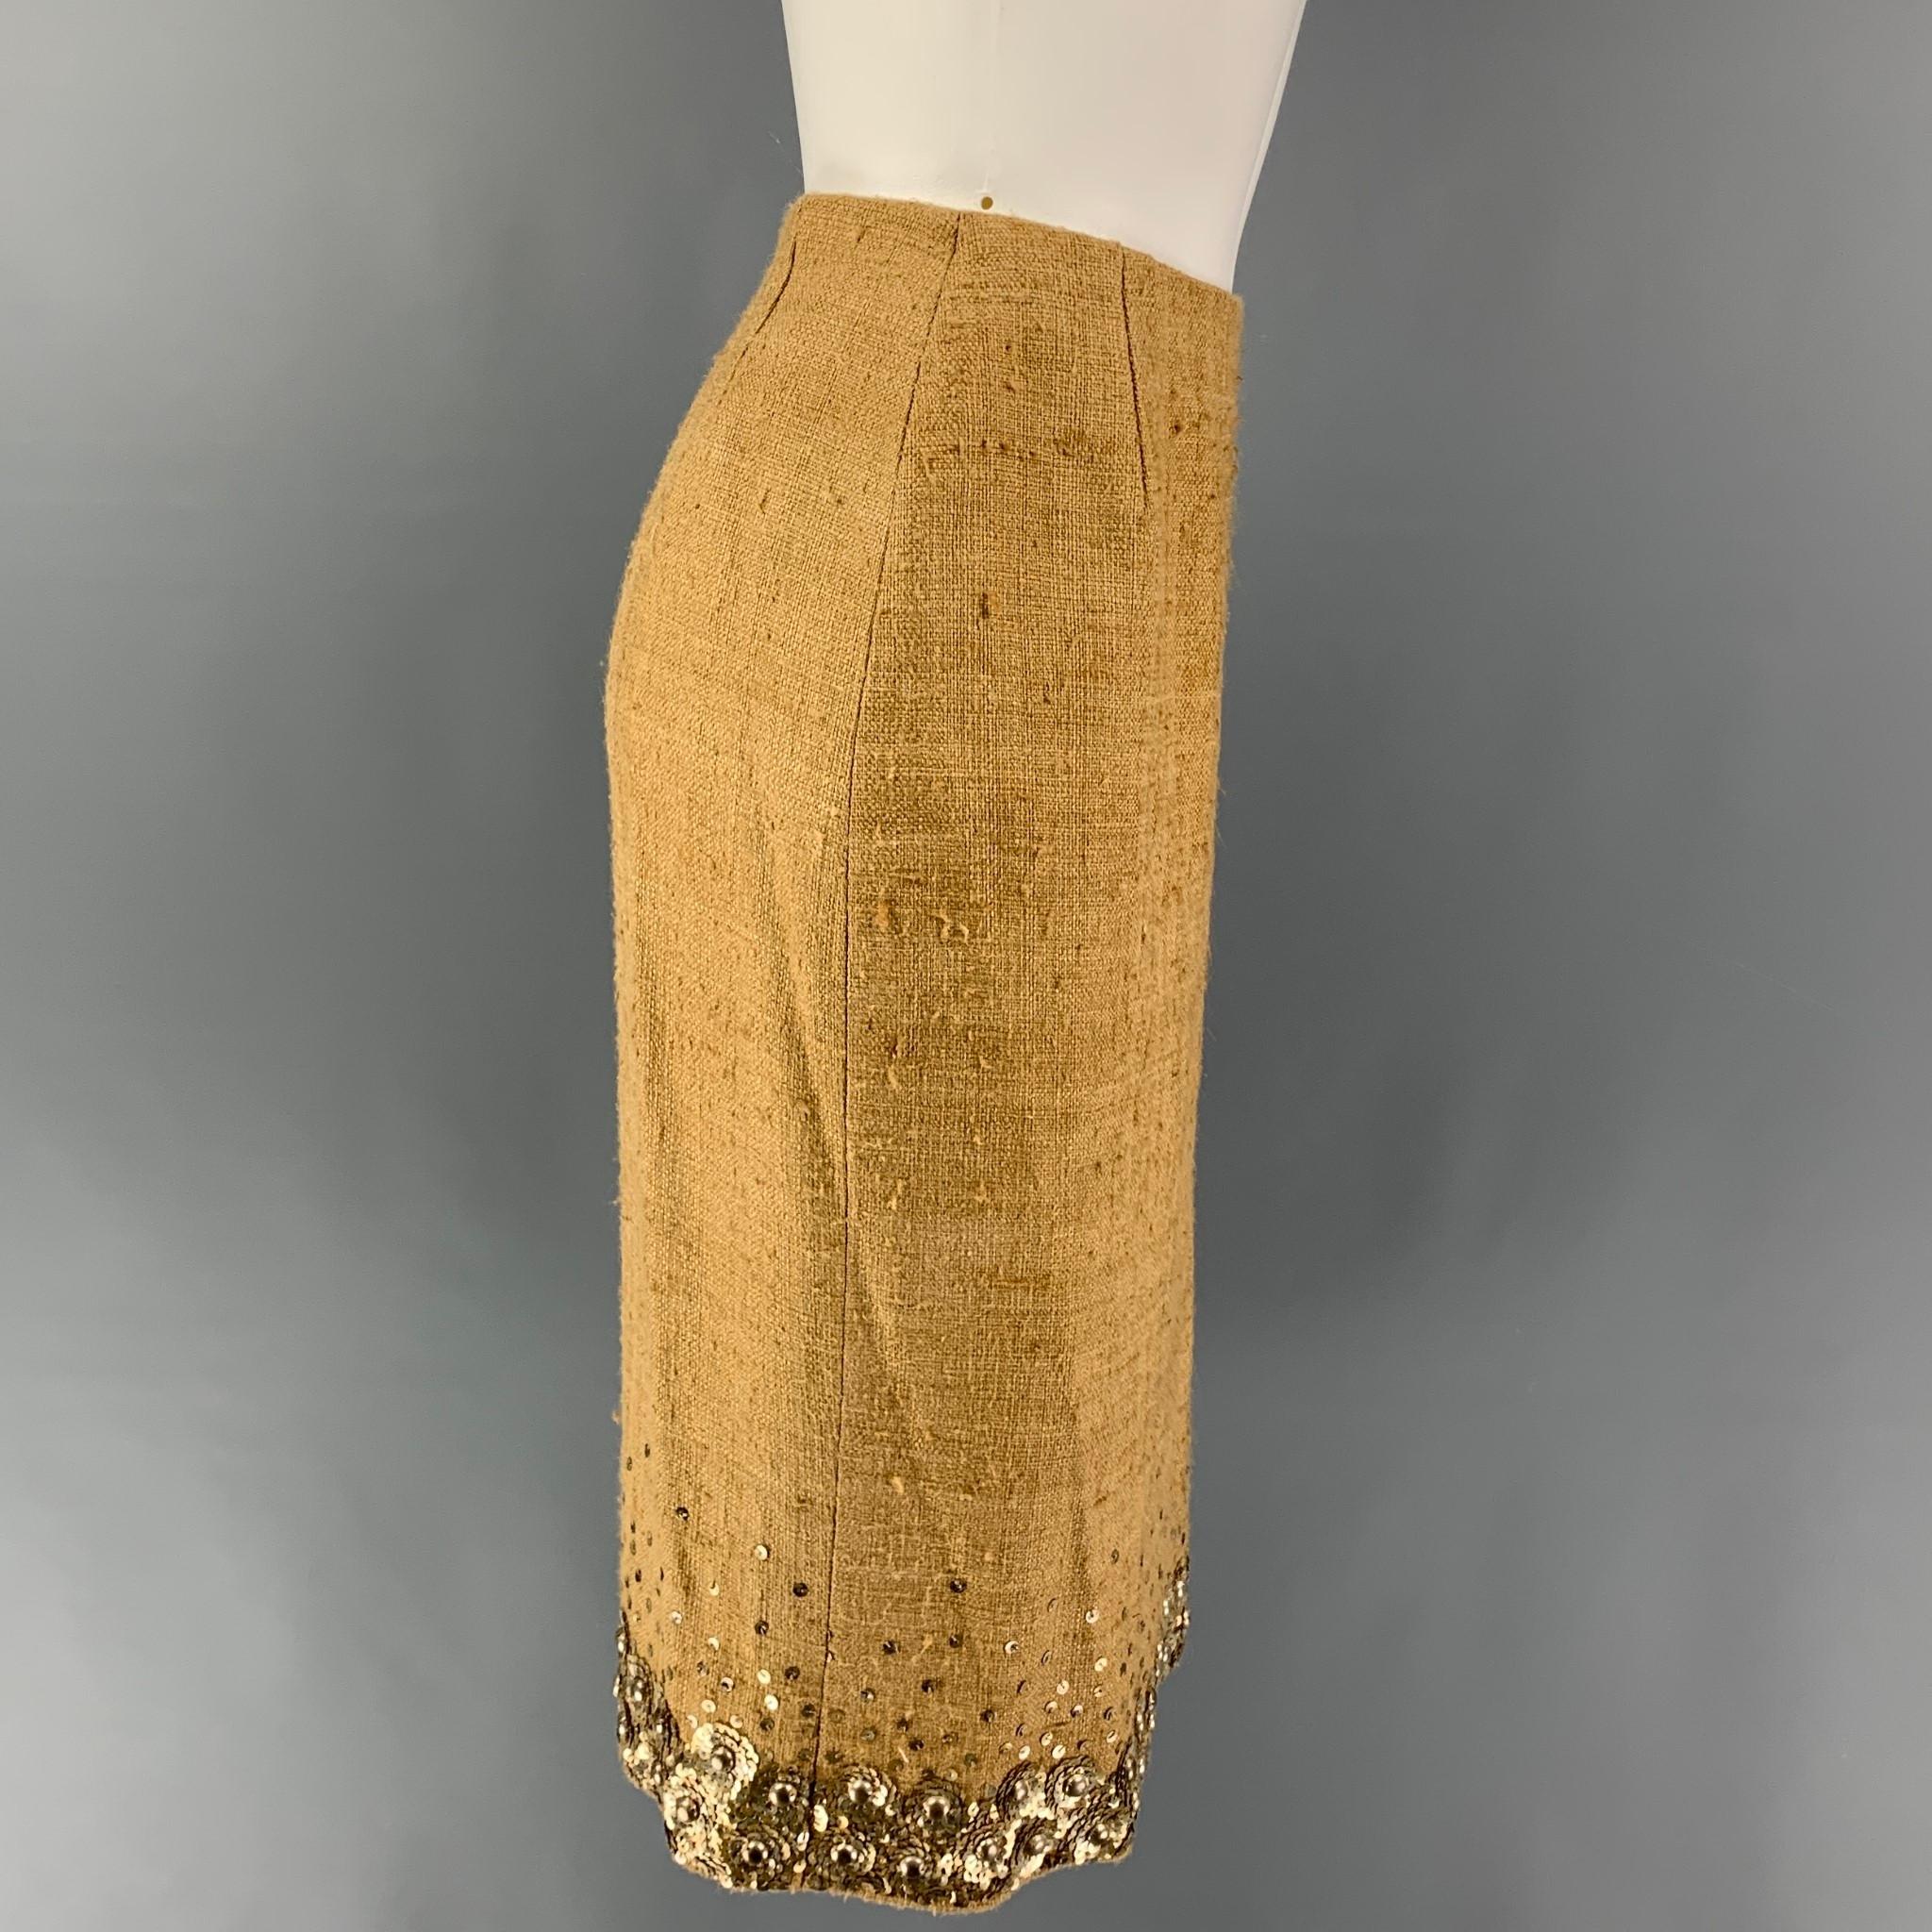 OSCAR DE LA RENTA skirt comes in a beige silk with a slip liner featuring a pencil style, sequined trim, beaded embellishments, and a side zipper closure. Made in USA.

Very Good Pre-Owned Condition.
Marked: 6

Measurements:

Waist: 27 in.
Hip: 38